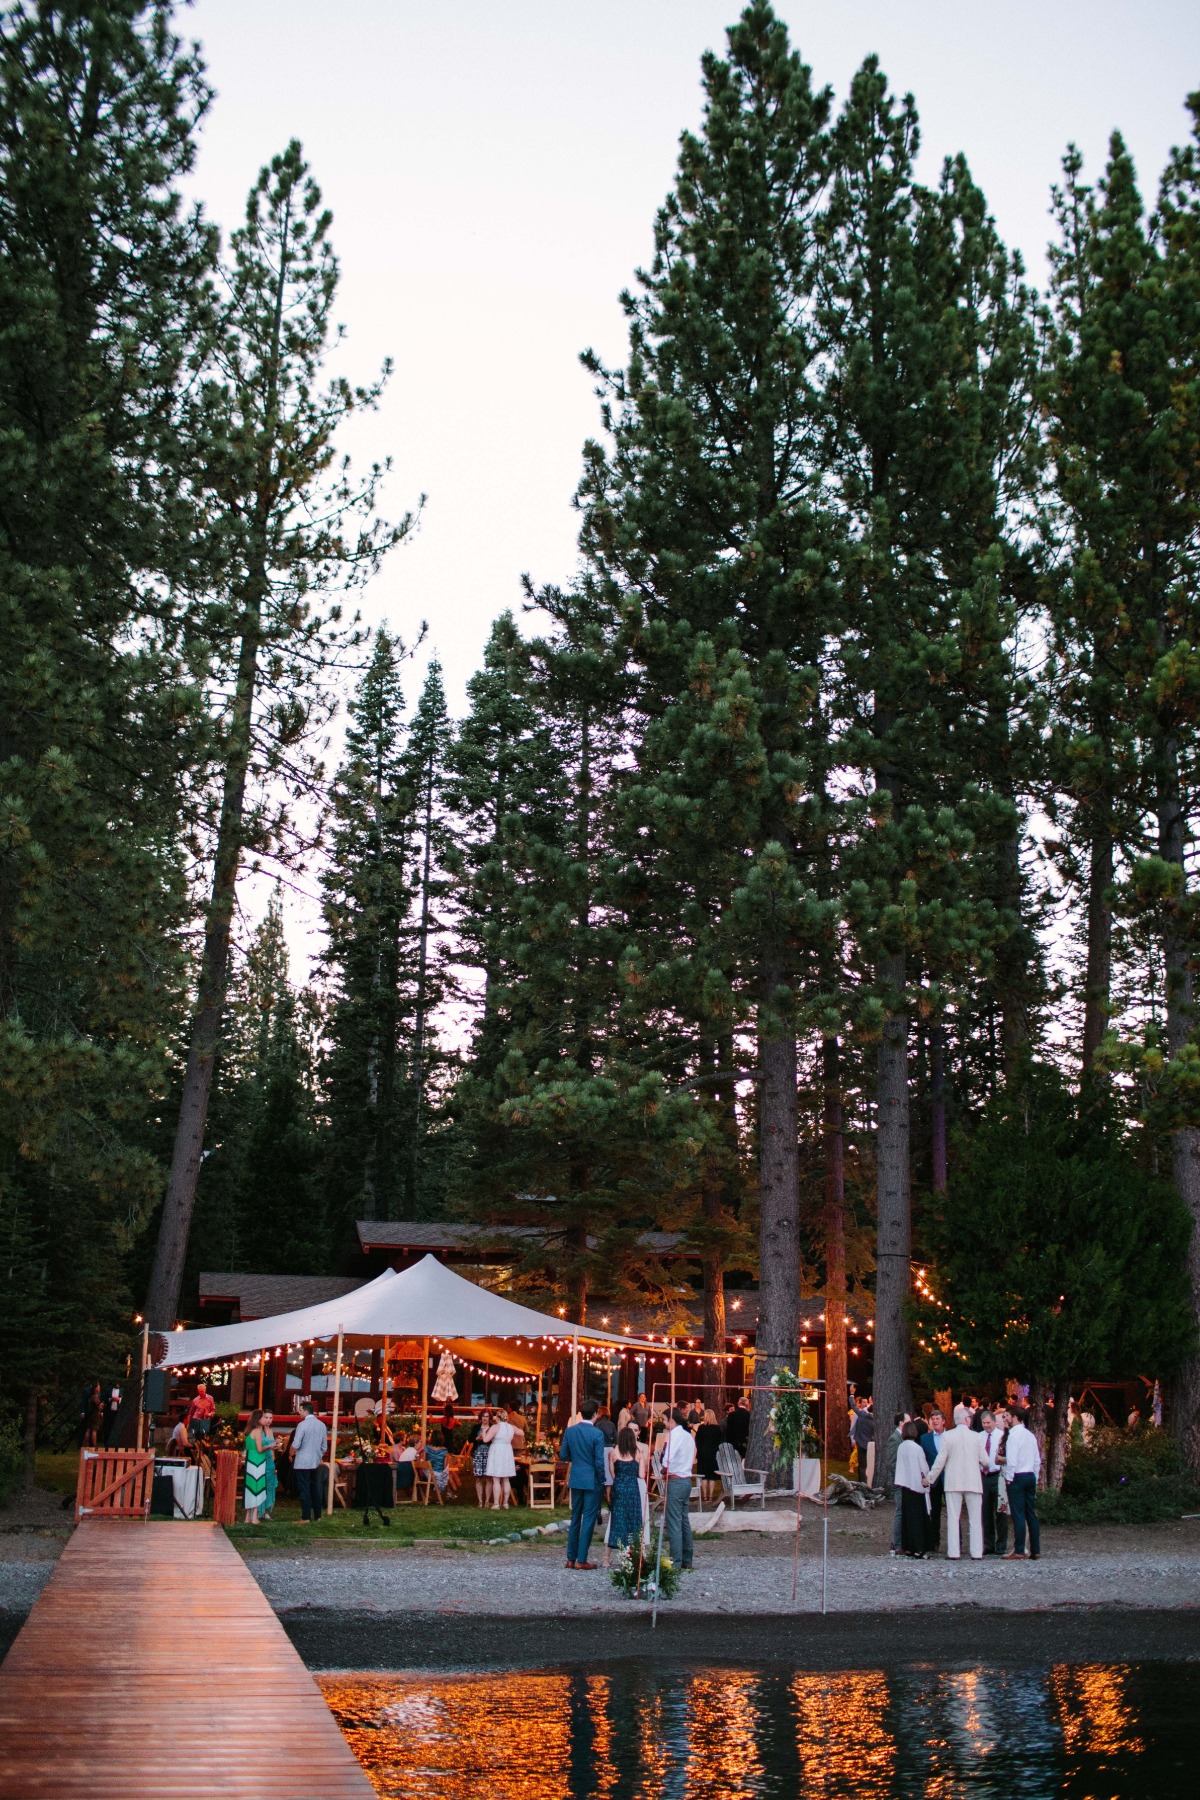 Whimsical and Lighthearted Wedding on the Shores of Tahoe